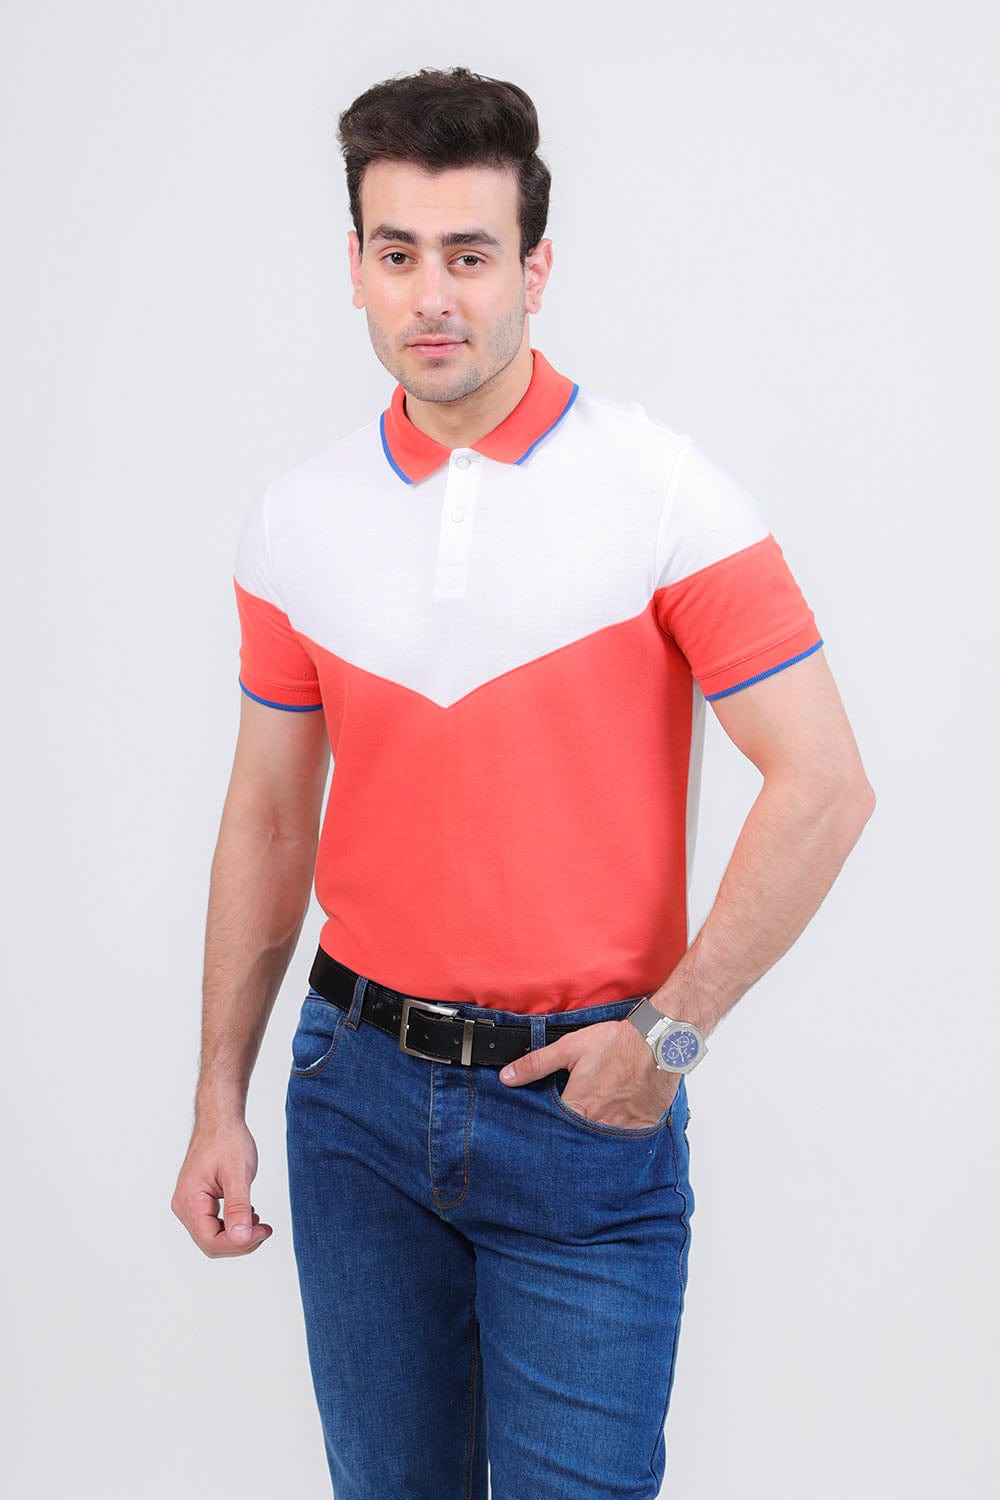 Hope Not Out by Shahid Afridi Men Polo Shirt Peach Half Sleeve Polo Shirt with White Panel for Men